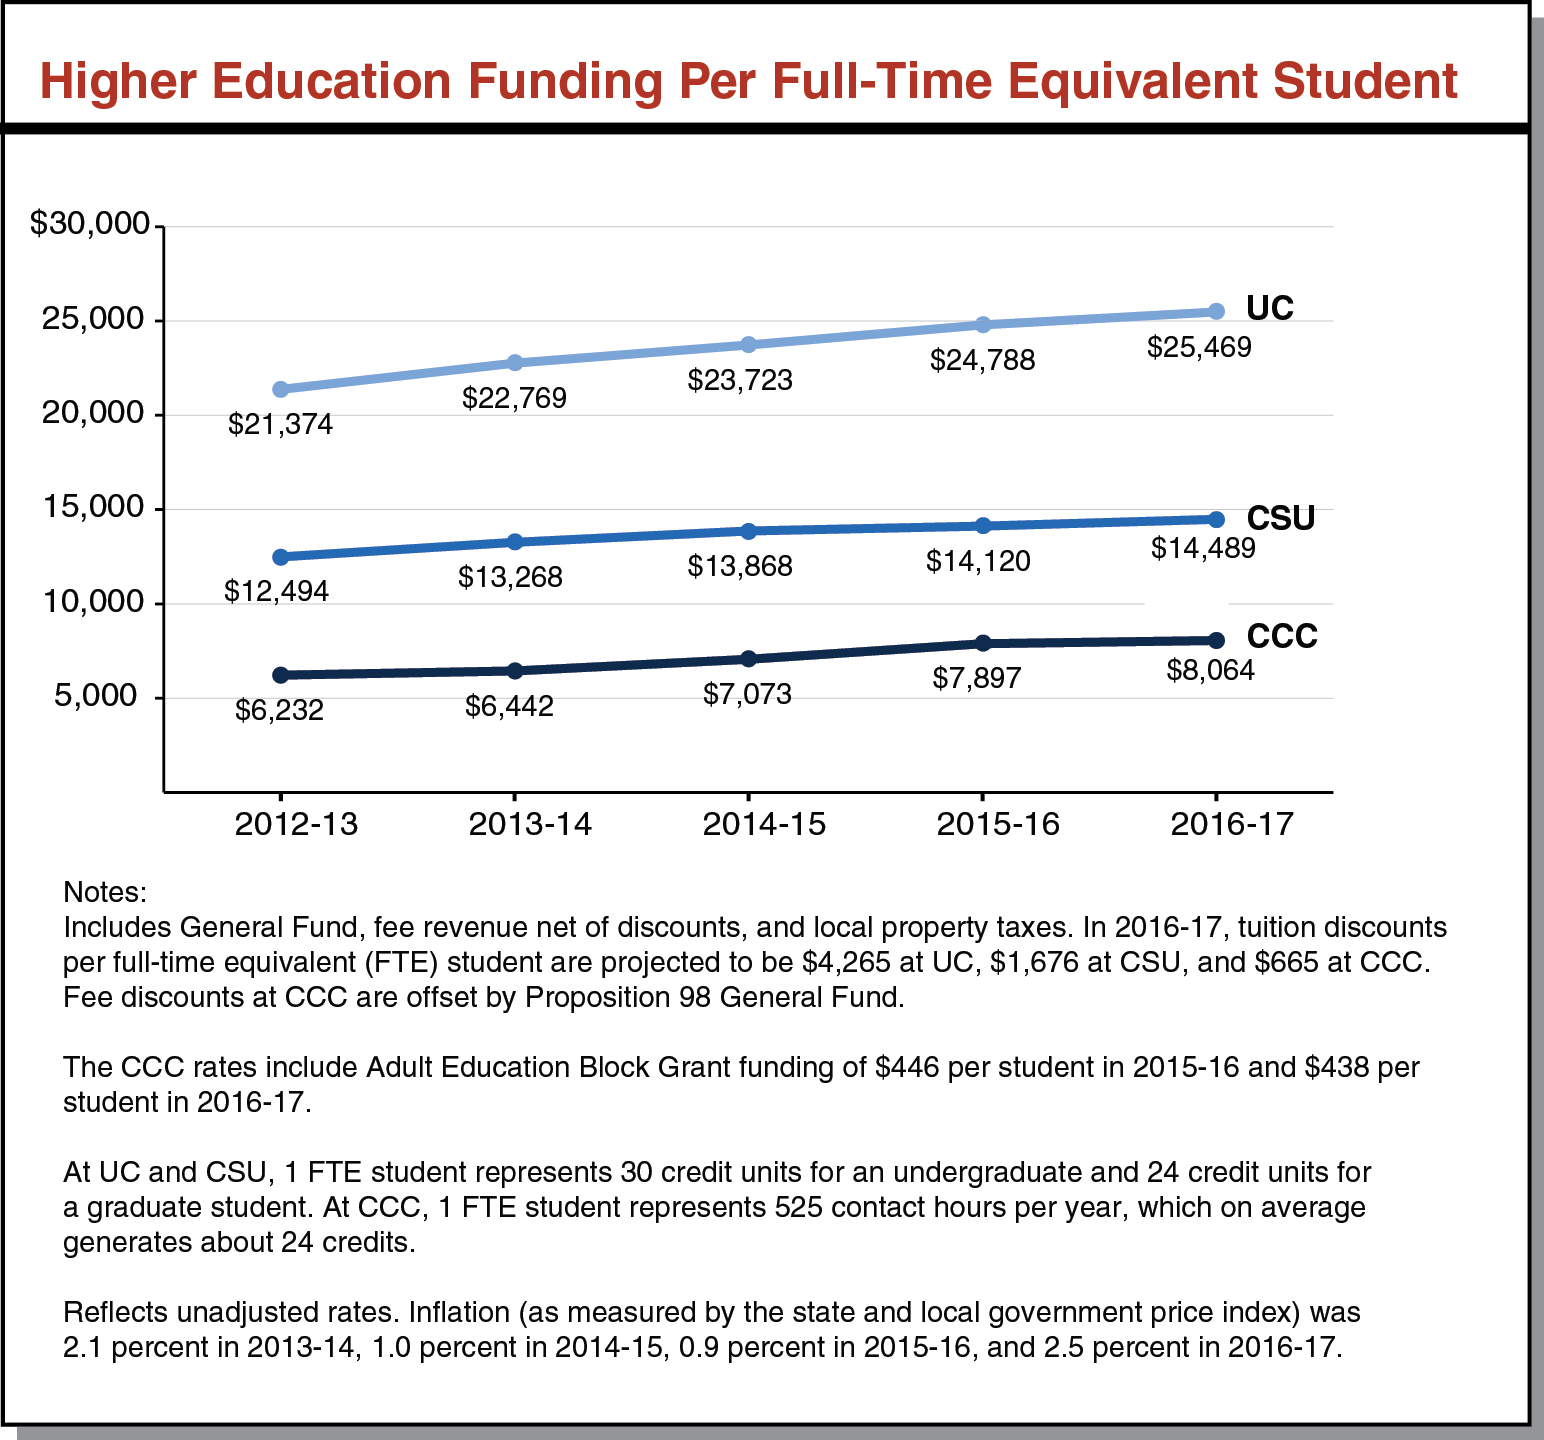 Higher Education Funding Per Full-Time Equivalent Student